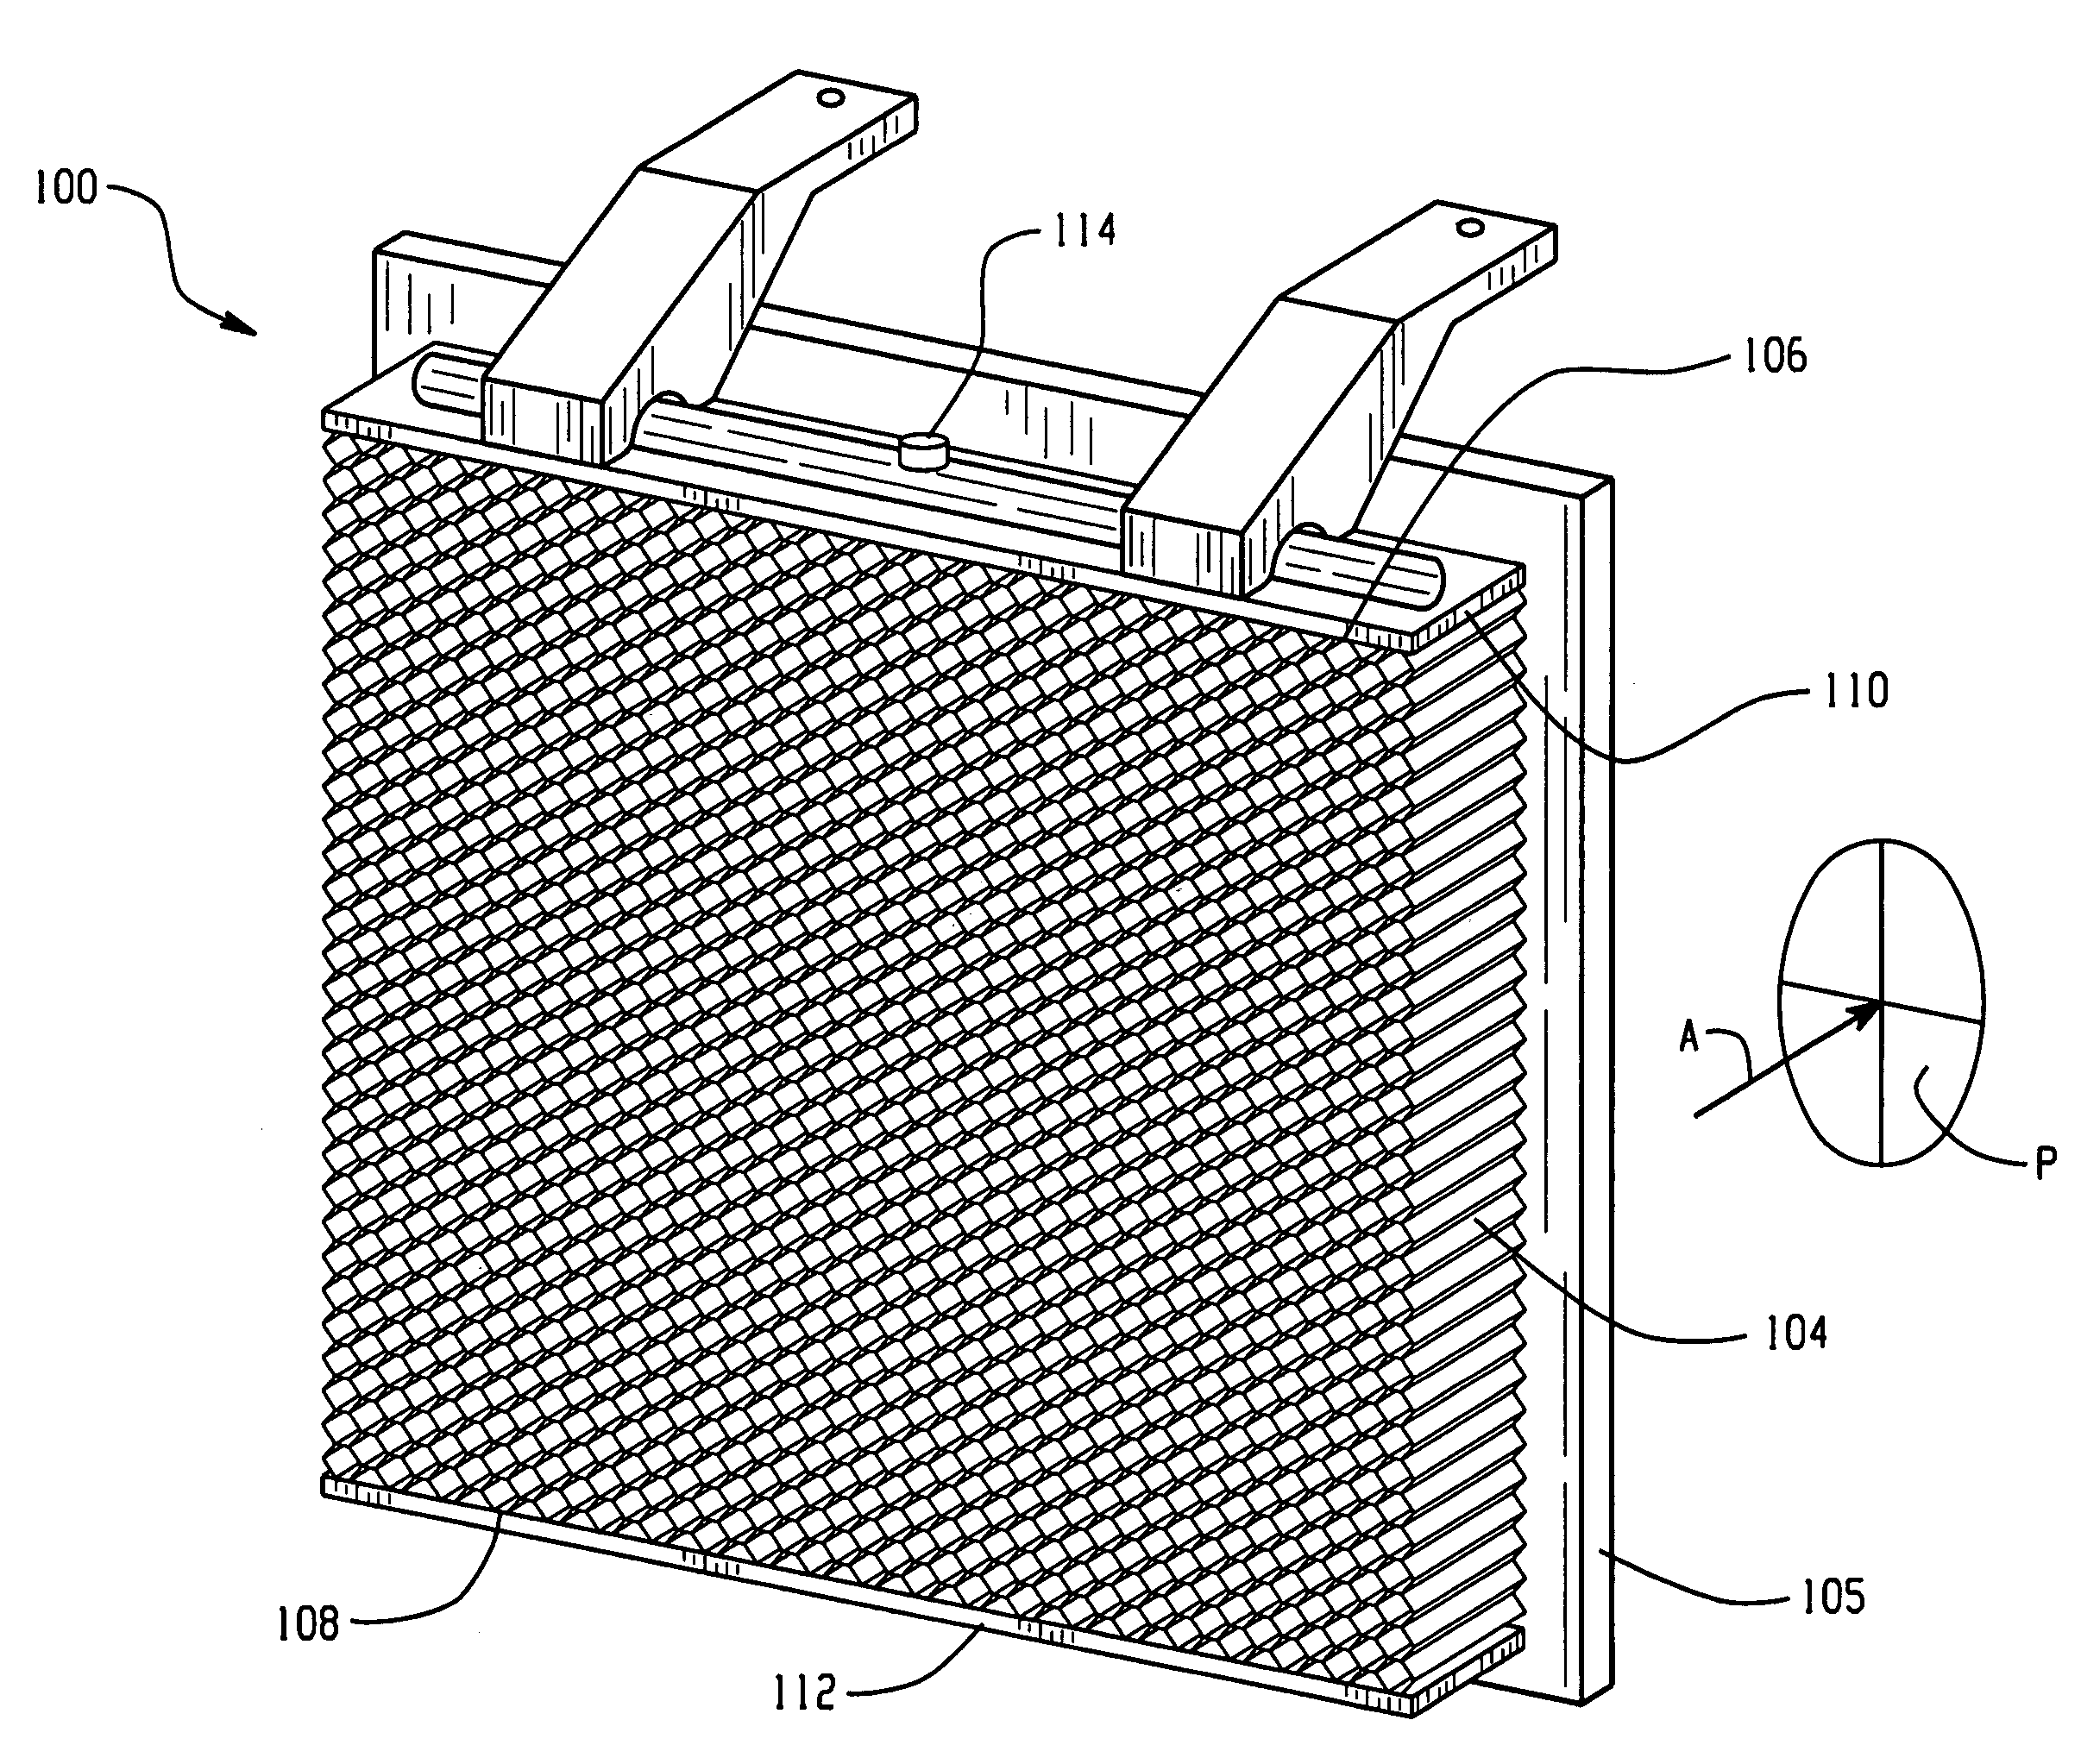 Volume-filling mechanical assemblies and methods of operating the same